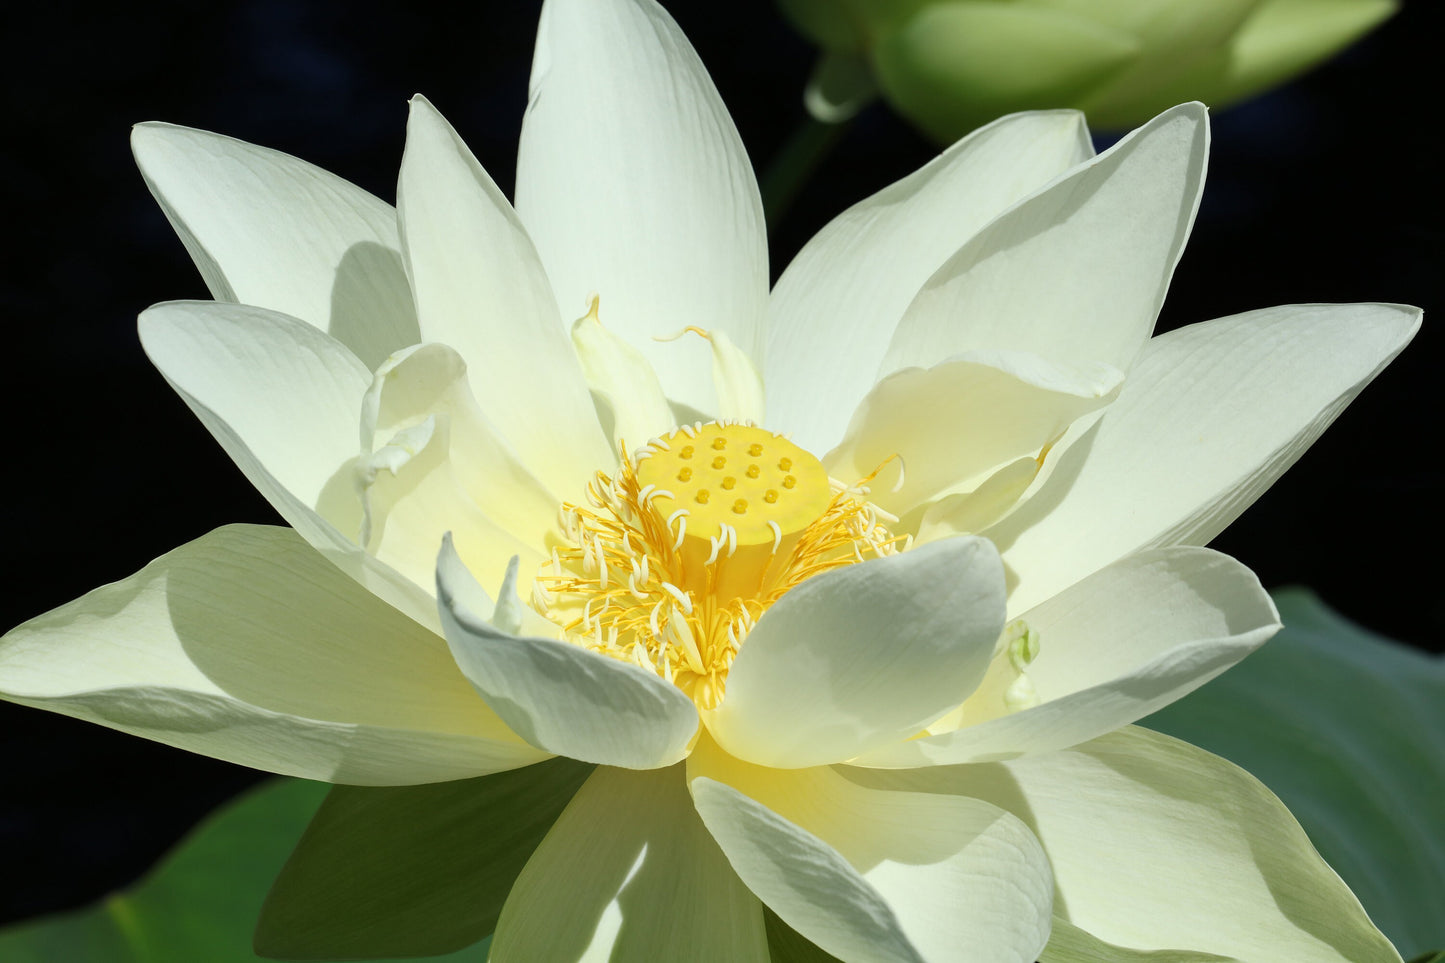 Lotus print, Giant Lotus photo, floral photography in color, flower wall art, floral decor, paper or canvas picture, 5x7 8x10 to 40x60"